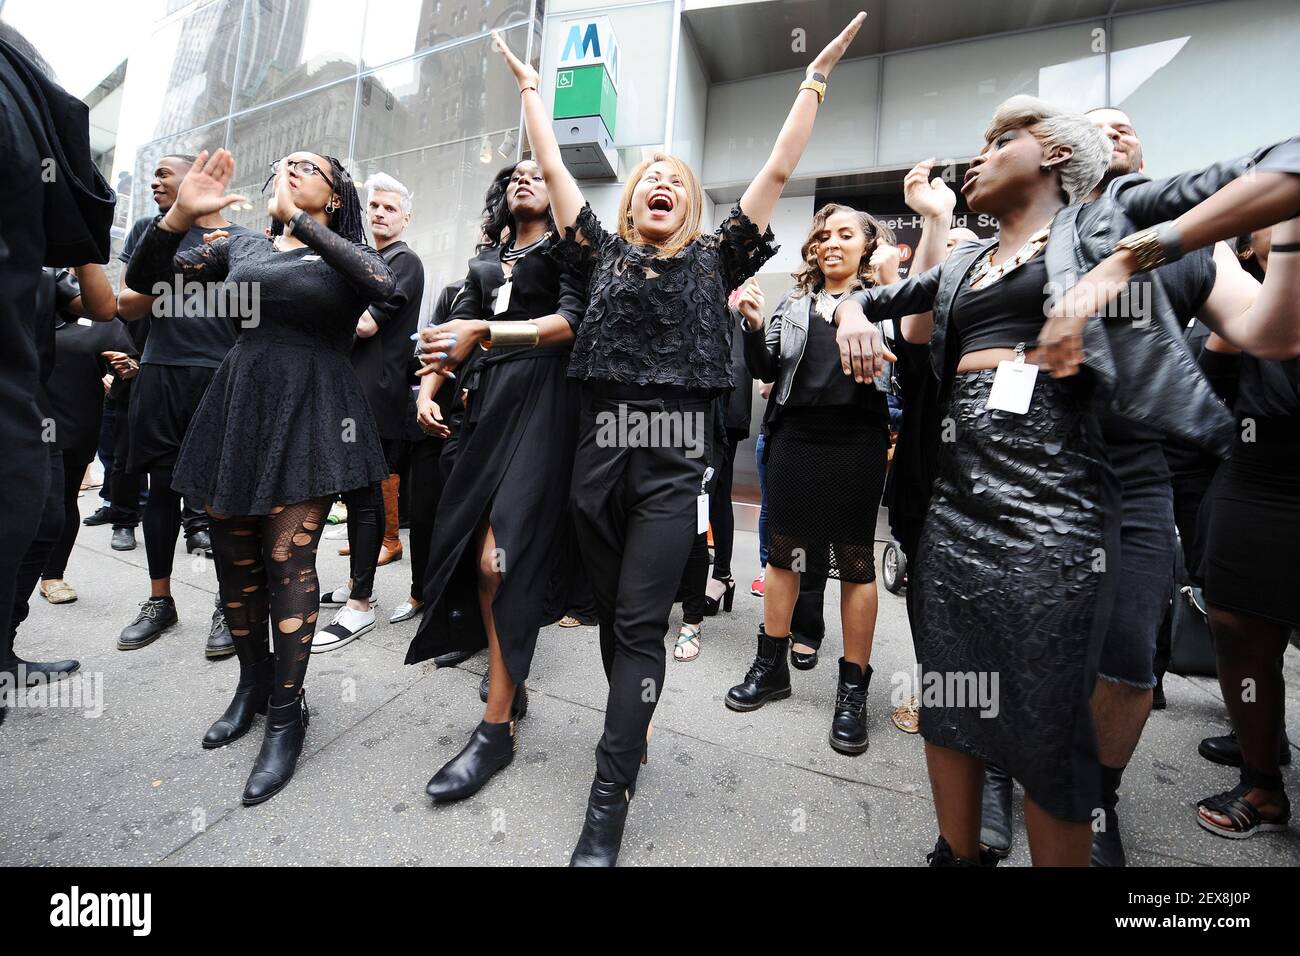 H&M Team members dance in celebration before the ceremony for the opening  of the H&M Herald Center Flagship Store in New York, NY, on May 20, 2015.  (Photo by Anthony Behar) ***